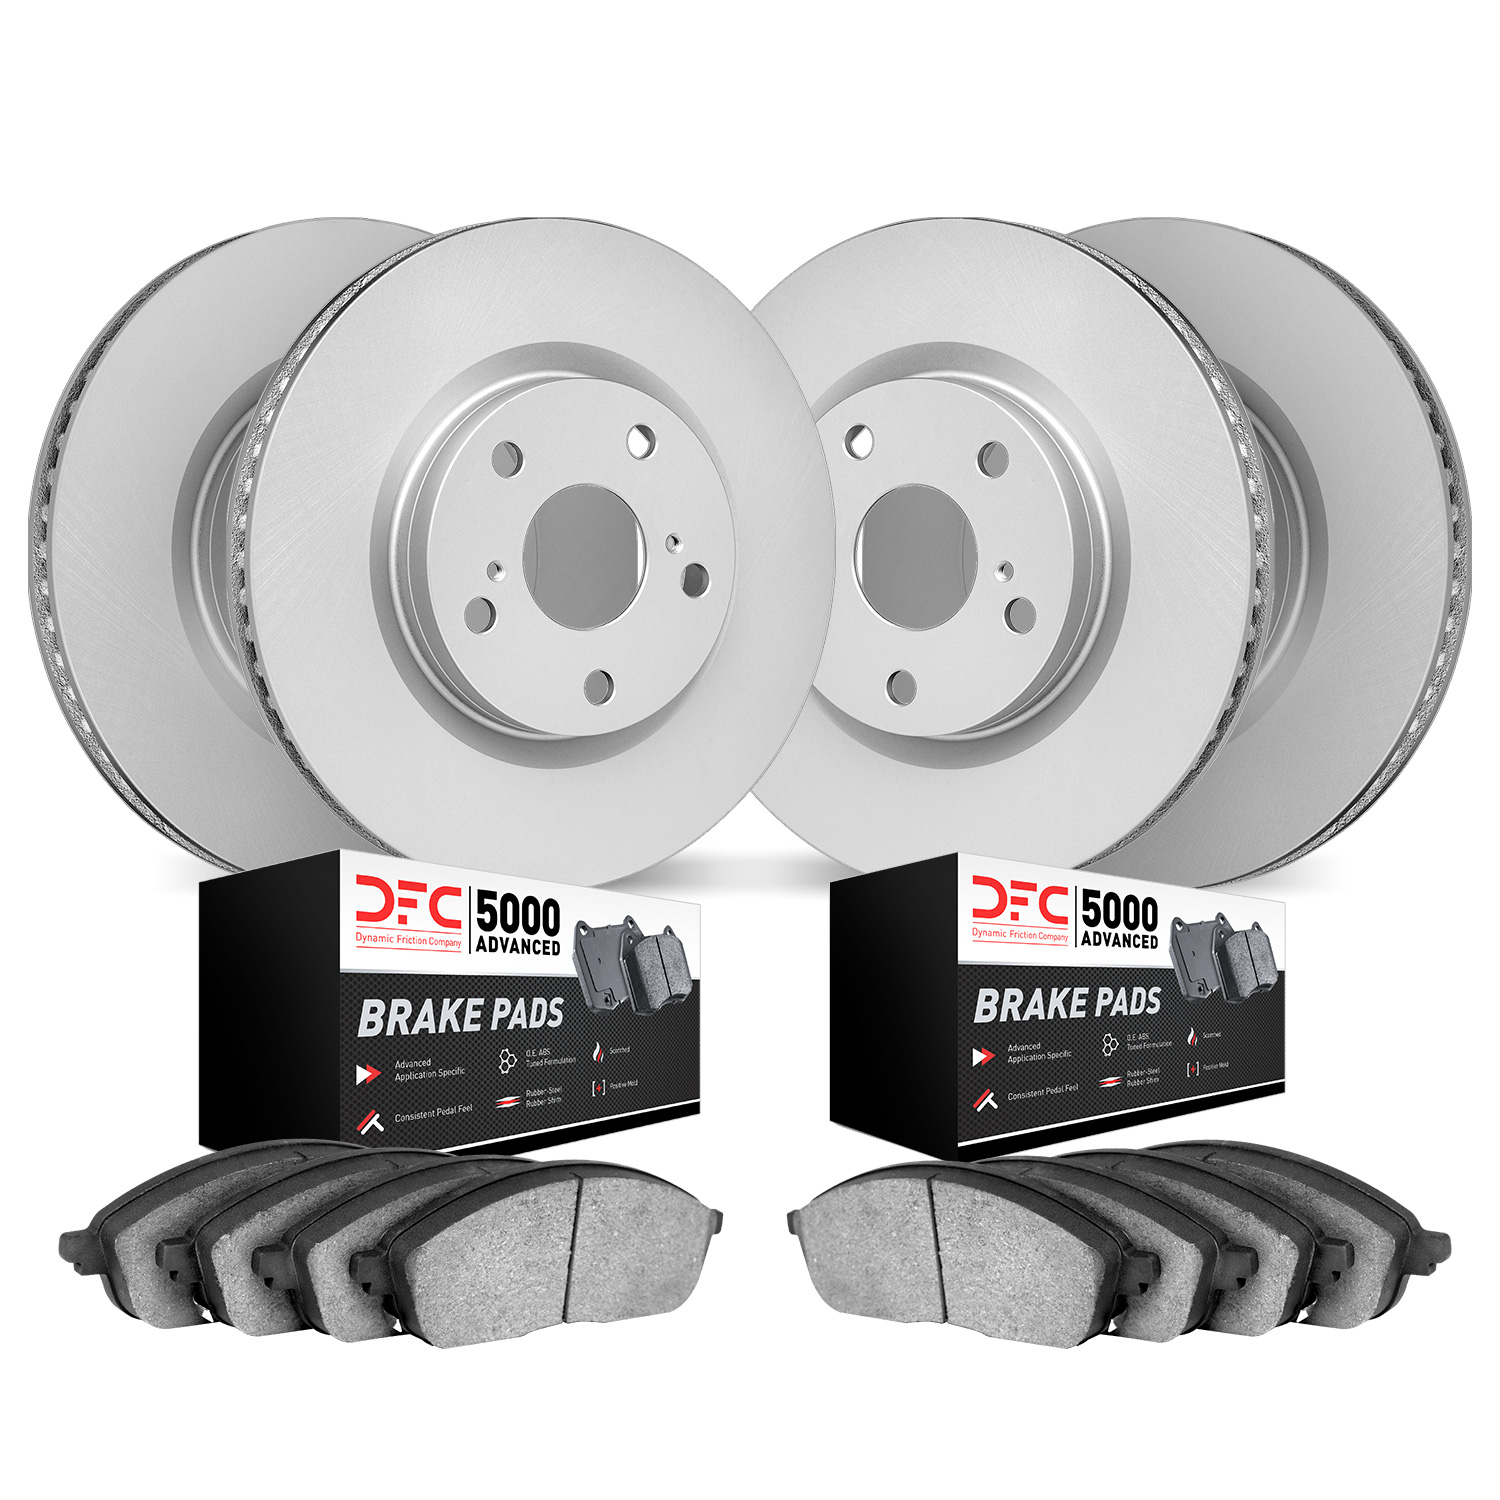 4504-45010 Geospec Brake Rotors w/5000 Advanced Brake Pads Kit, 2010-2017 GM, Position: Front and Rear